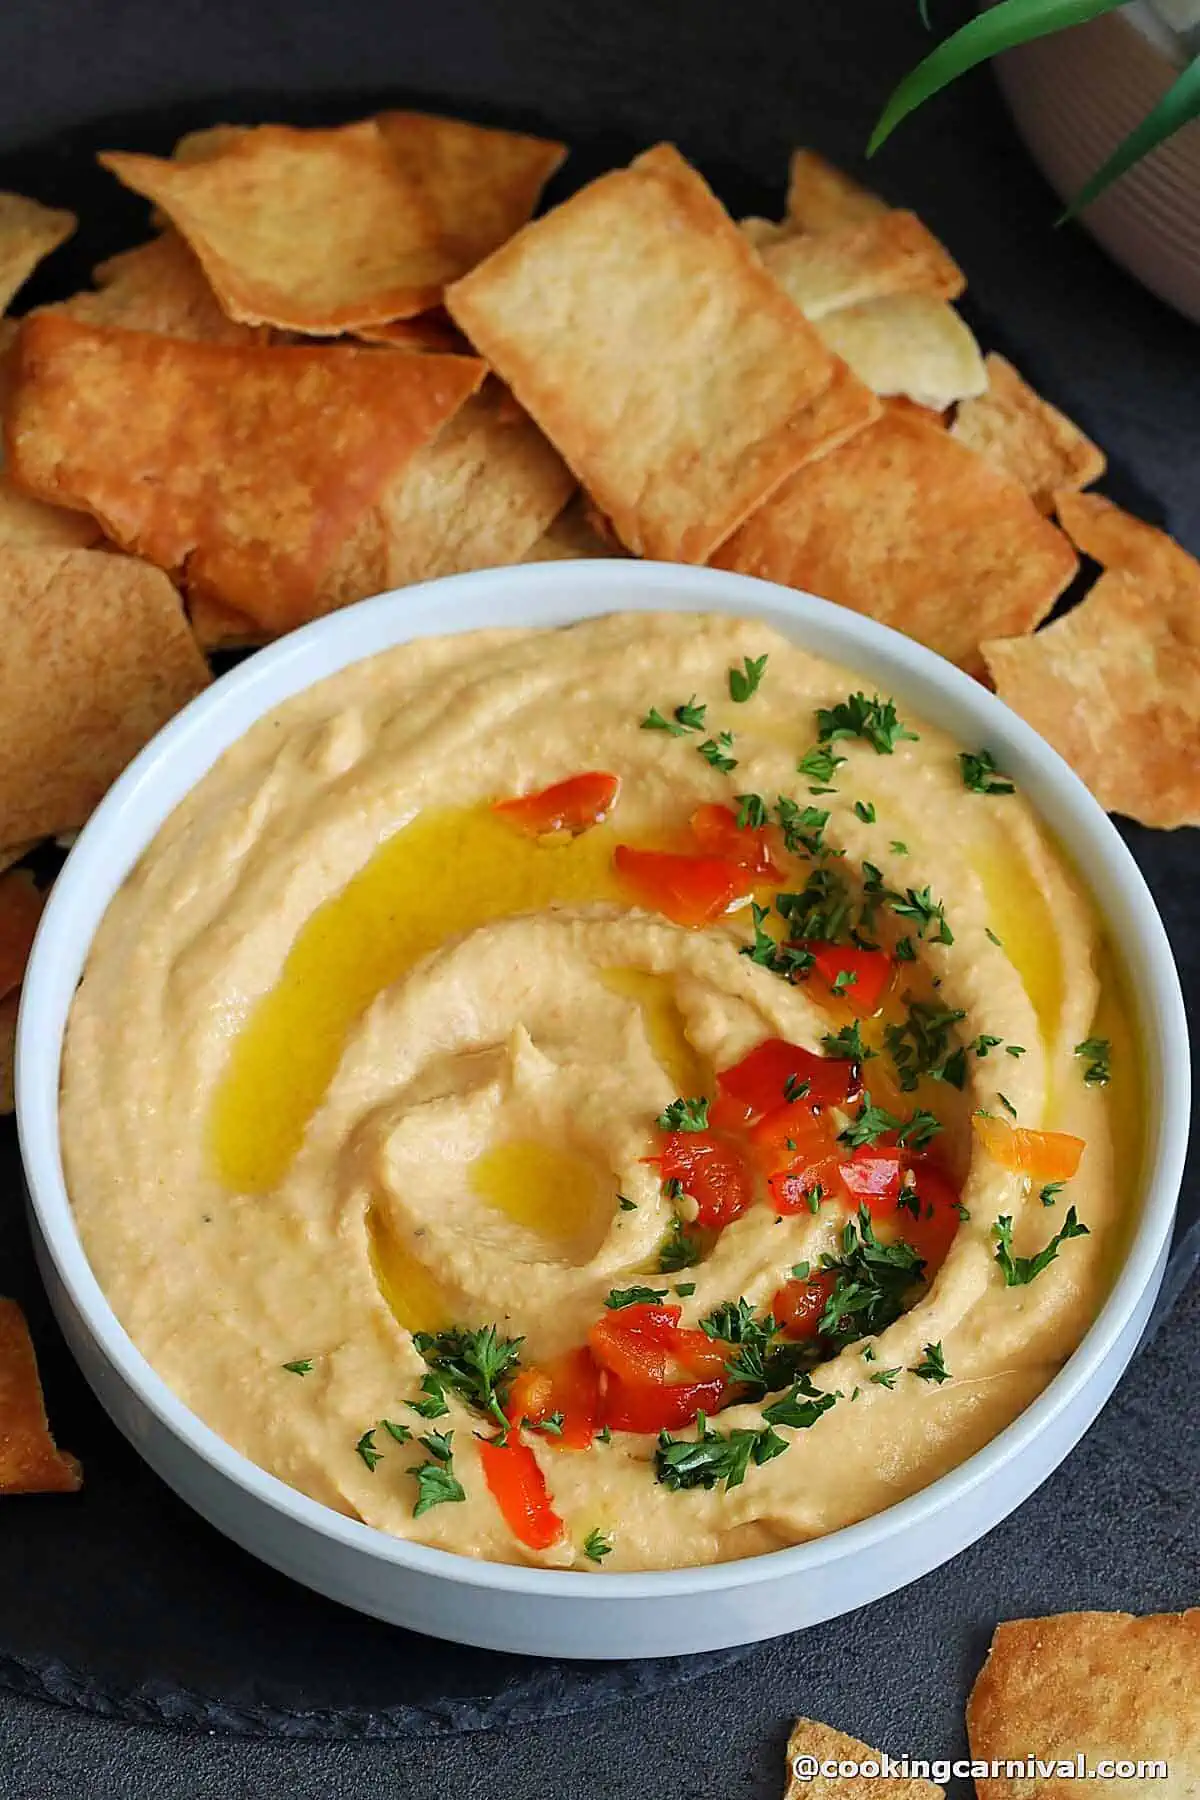 Roasted red pepper hummus in a bowl, topped with olive oil and parsley.